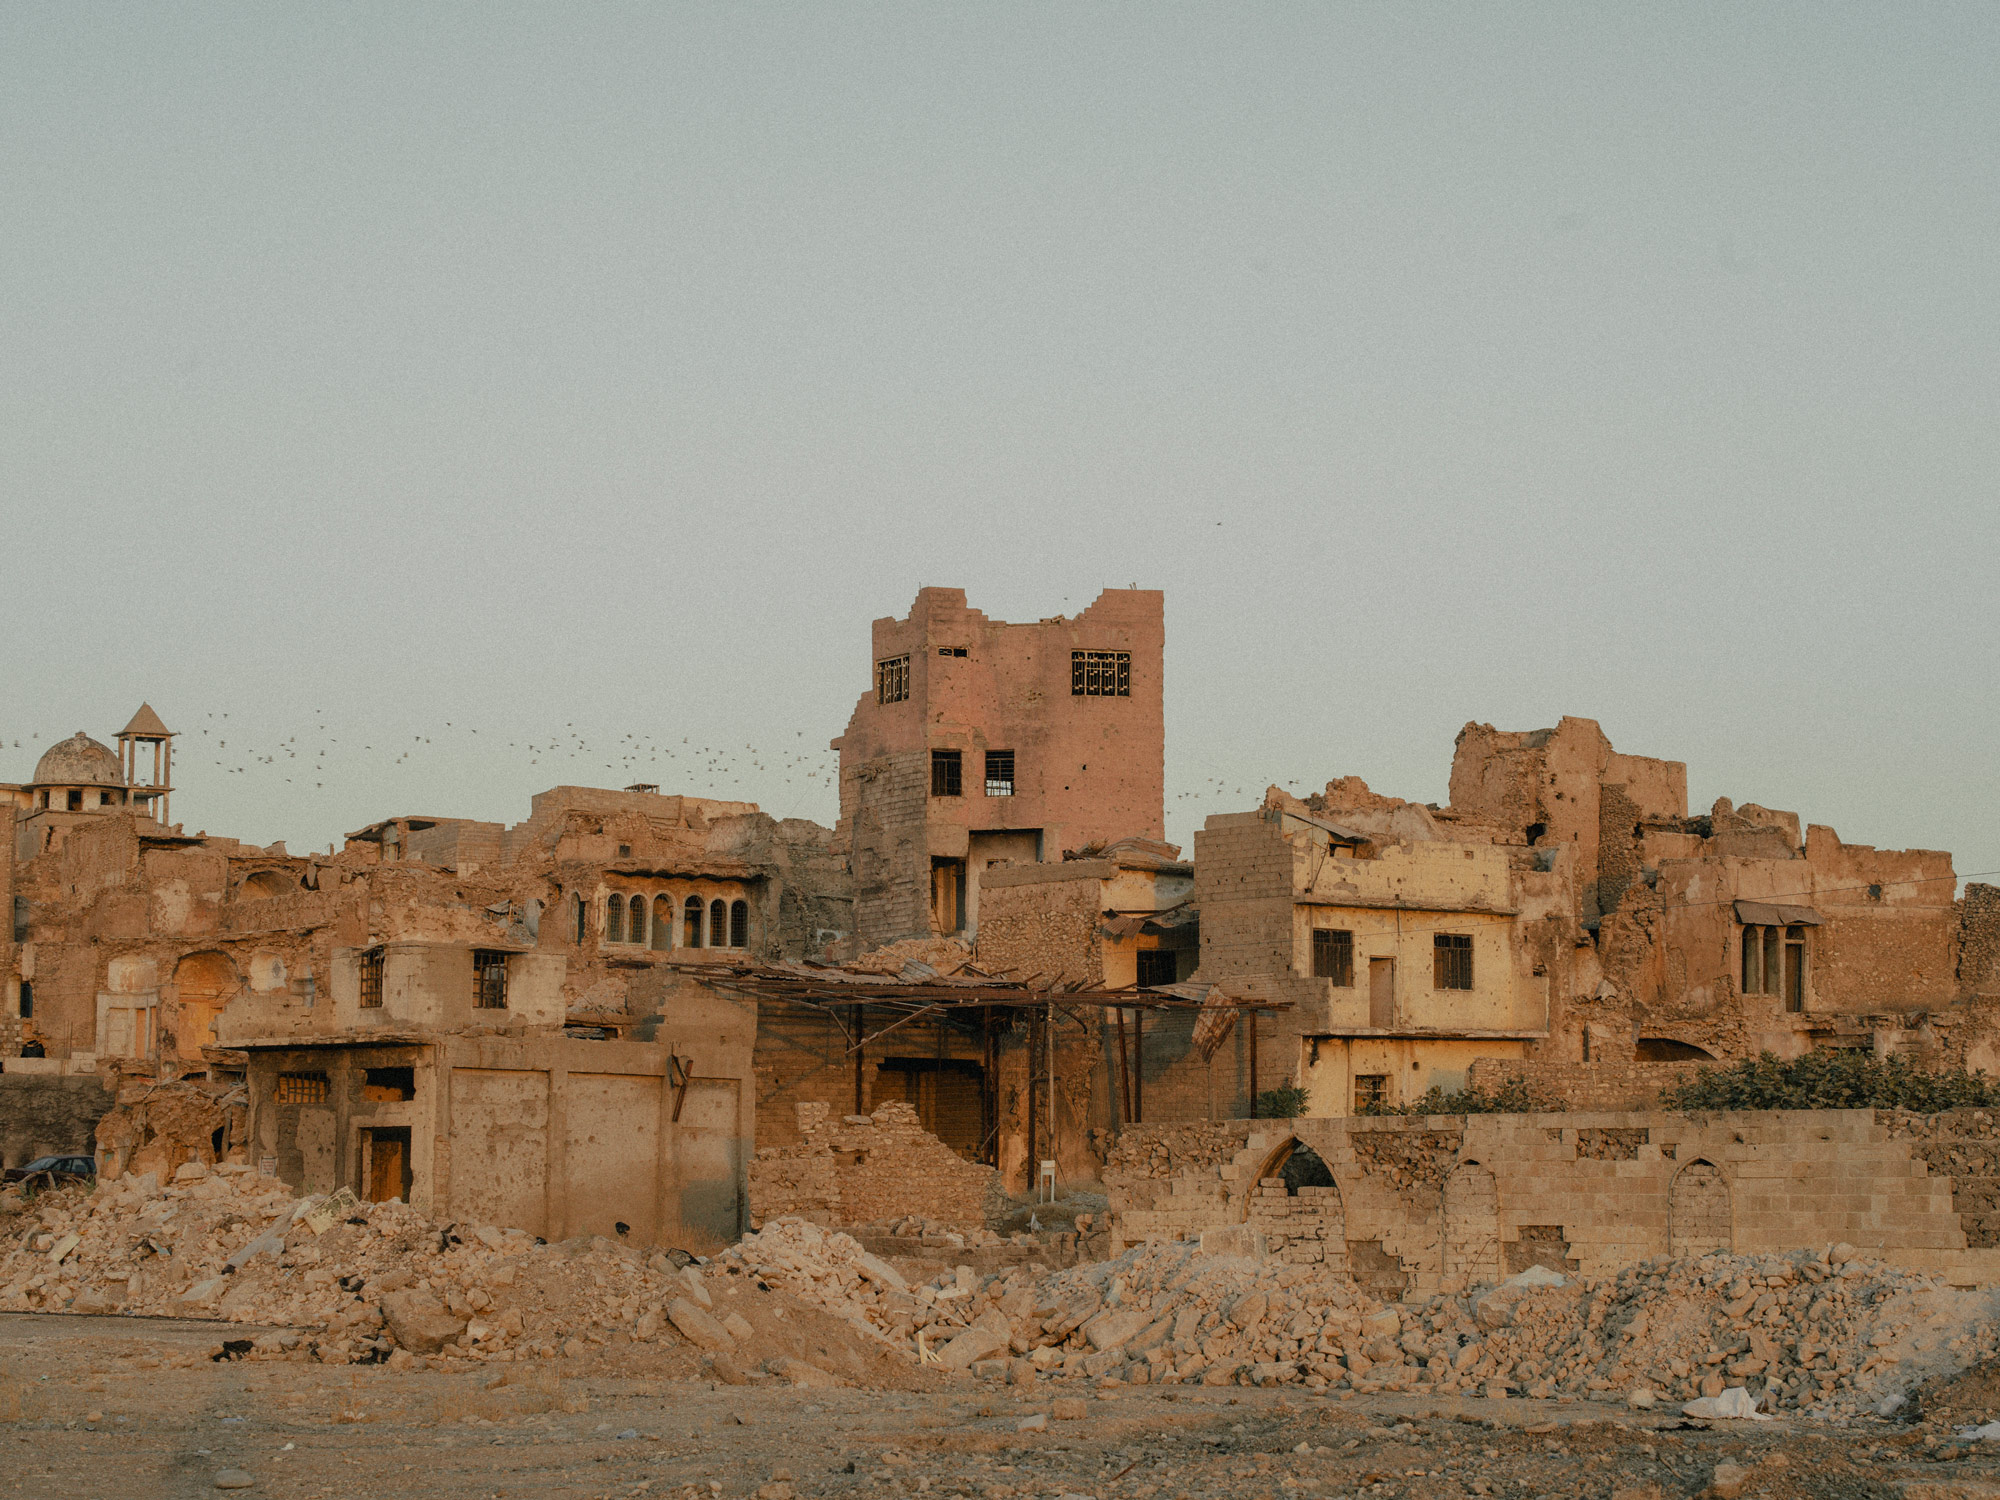 Mosul. 14 September 2021. The Old City of Mosul in ruins. After the conflict, only a few people returned to rebuild their homes.